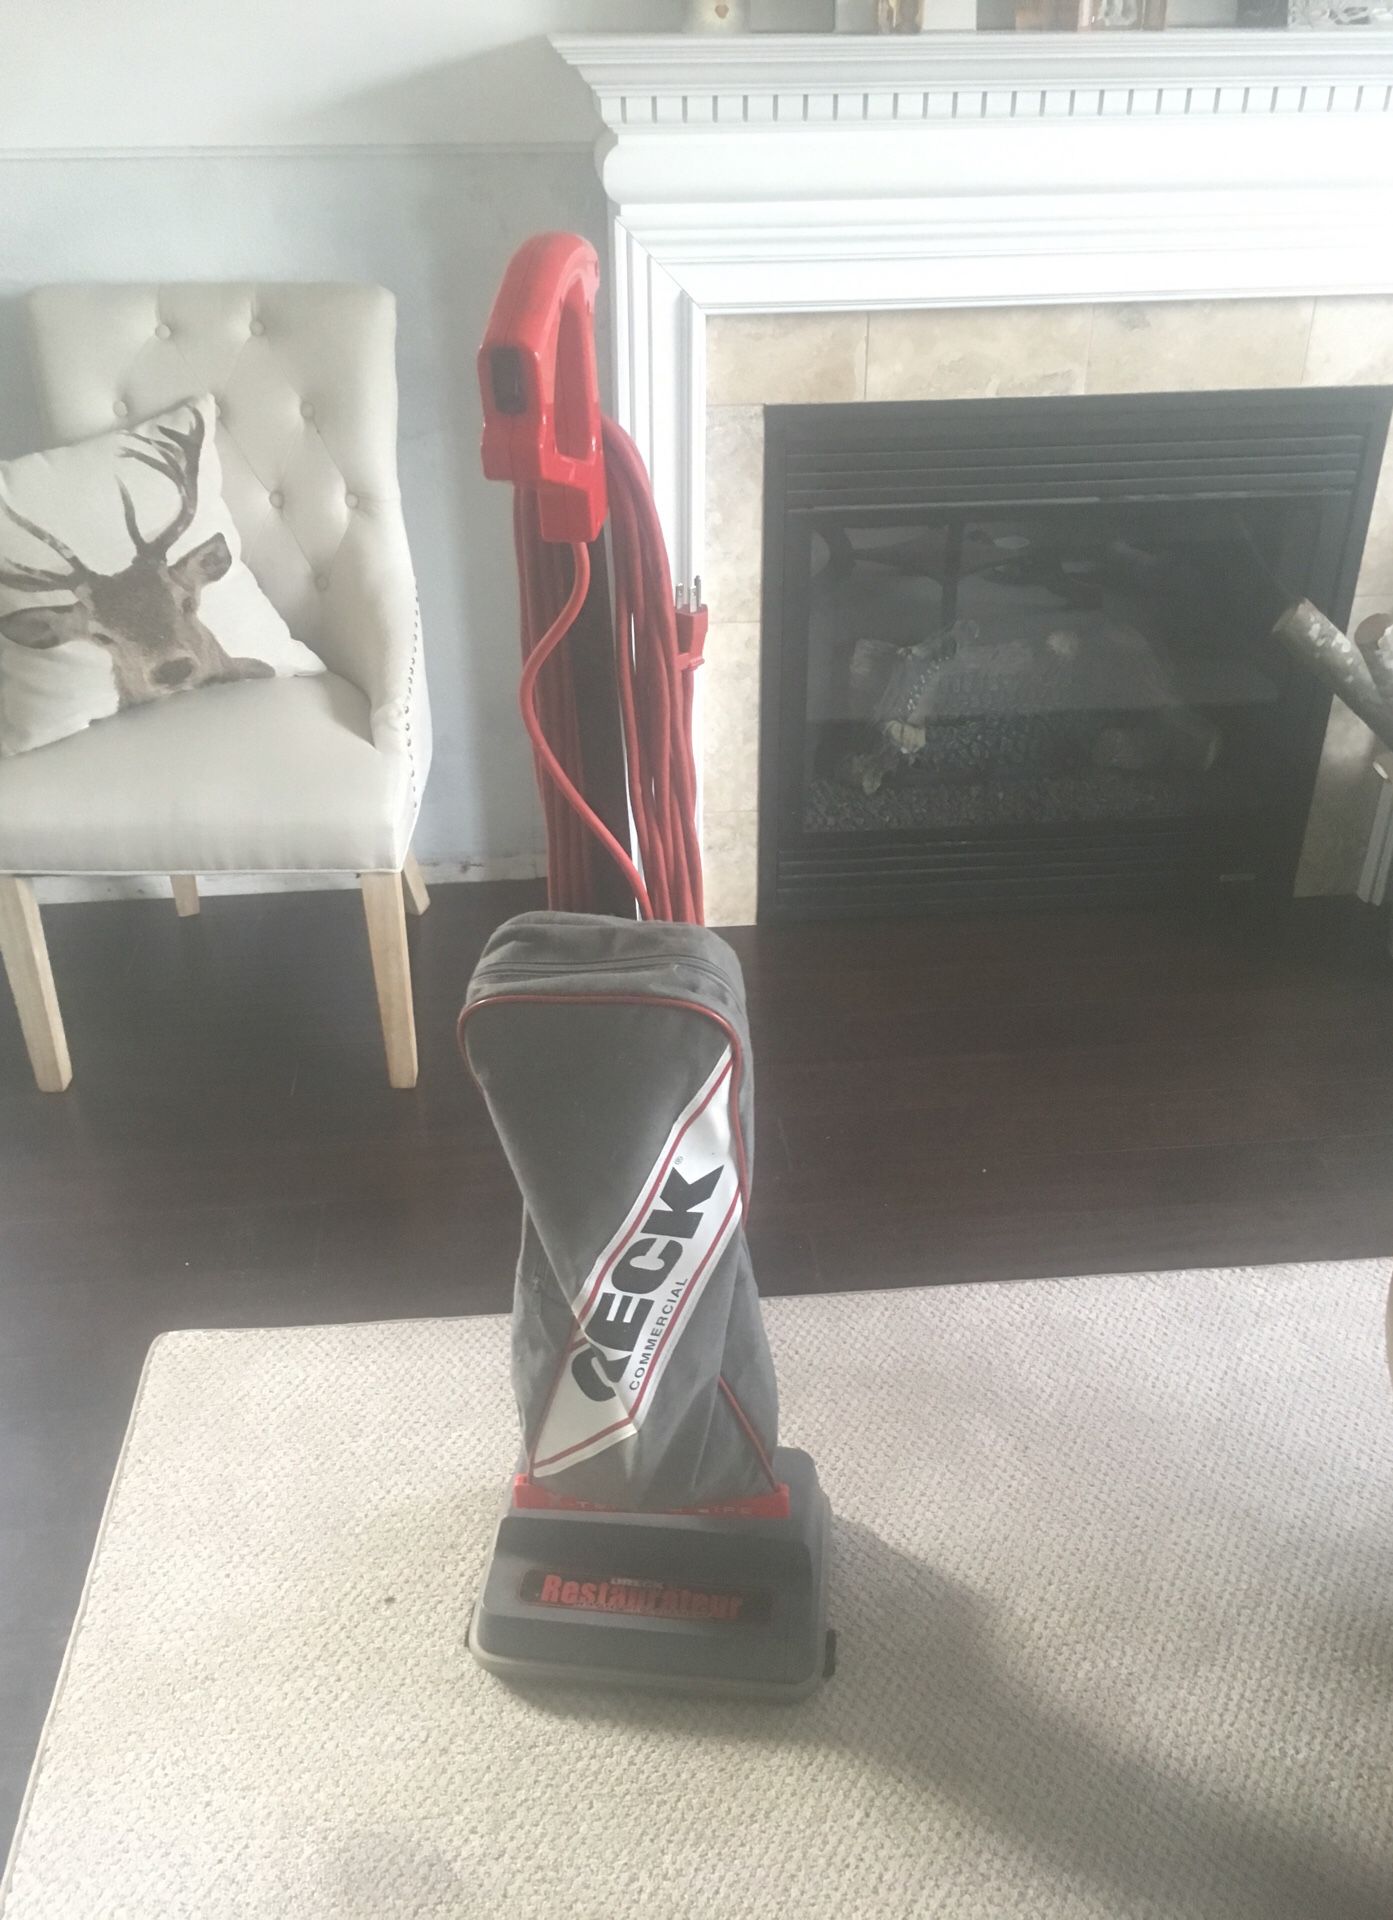 ORECK REAL "COMMERCIAL" vacuum - READ